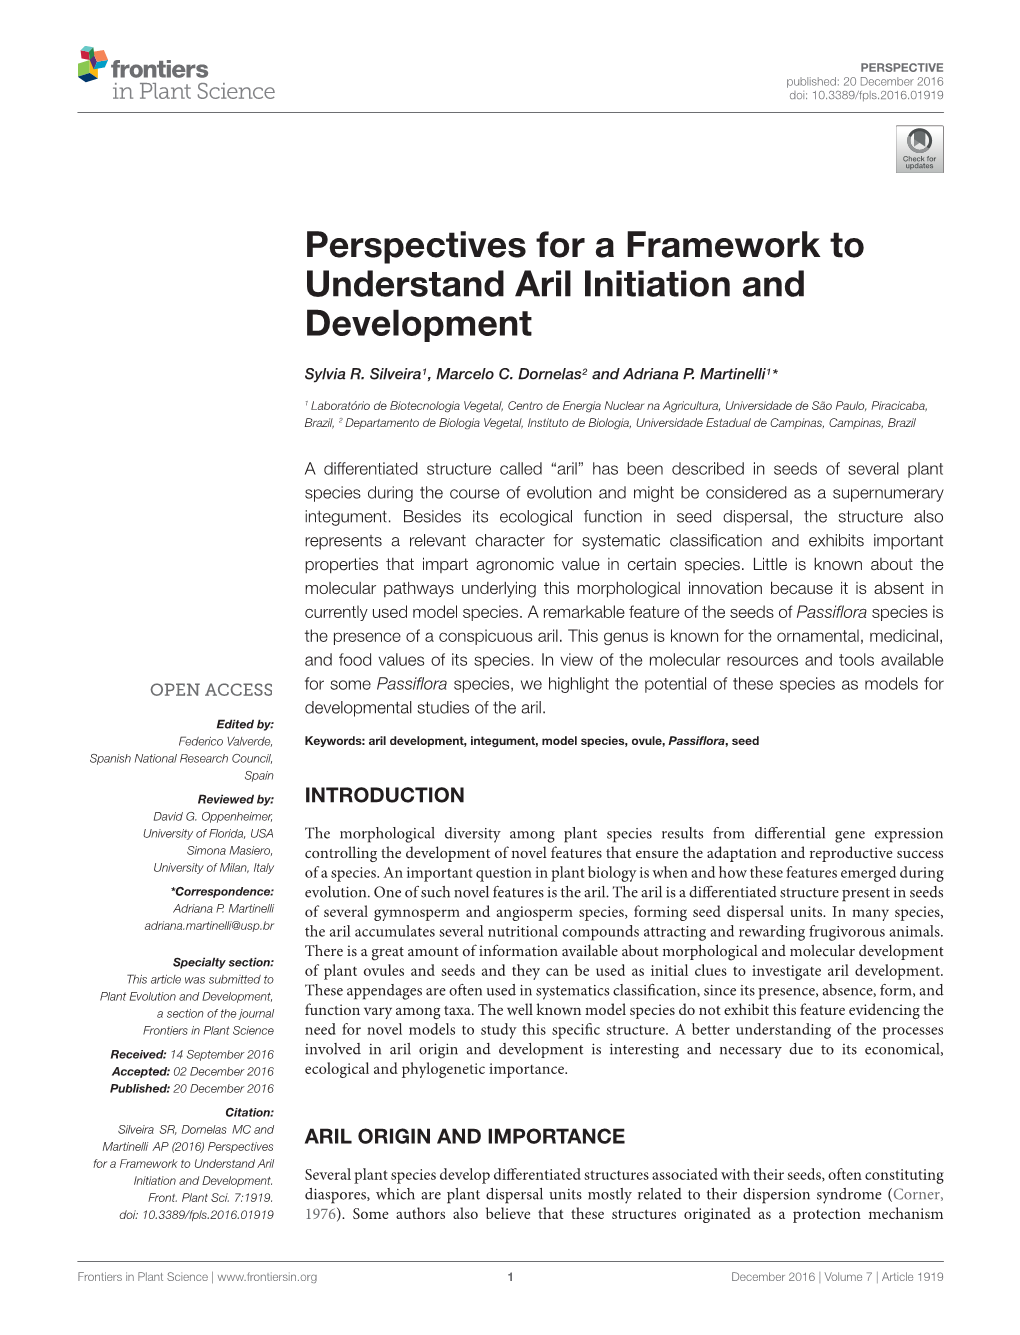 Perspectives for a Framework to Understand Aril Initiation and Development